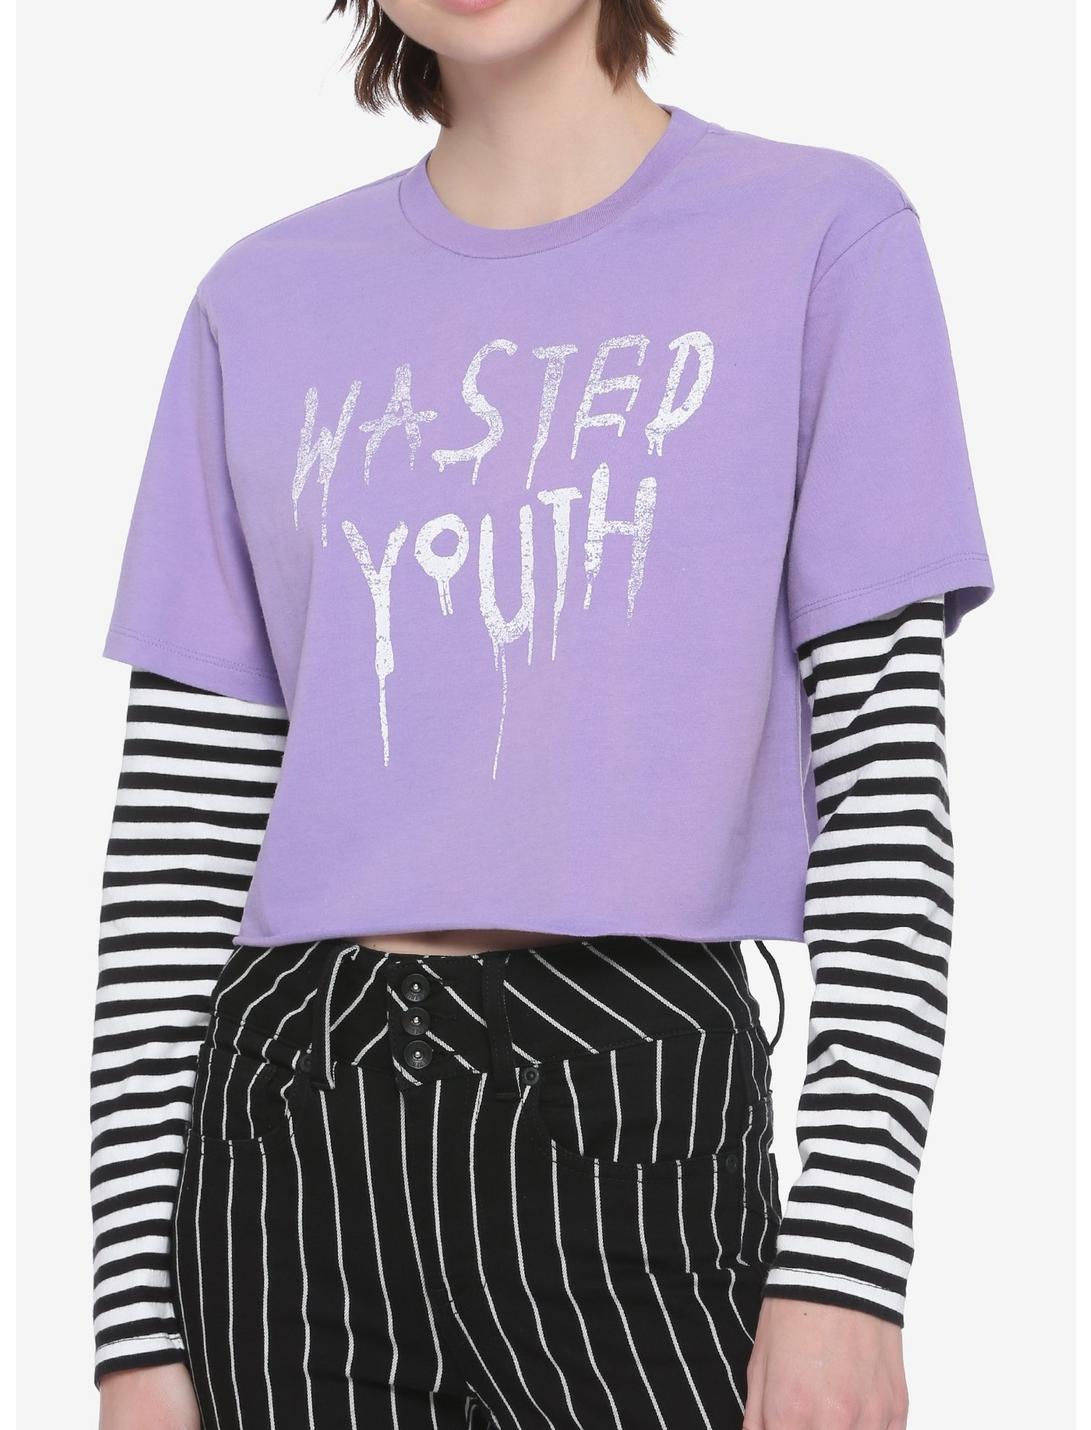 Wasted Youth Girls Crop Long-Sleeve T-Shirt, BLACK, hi-res